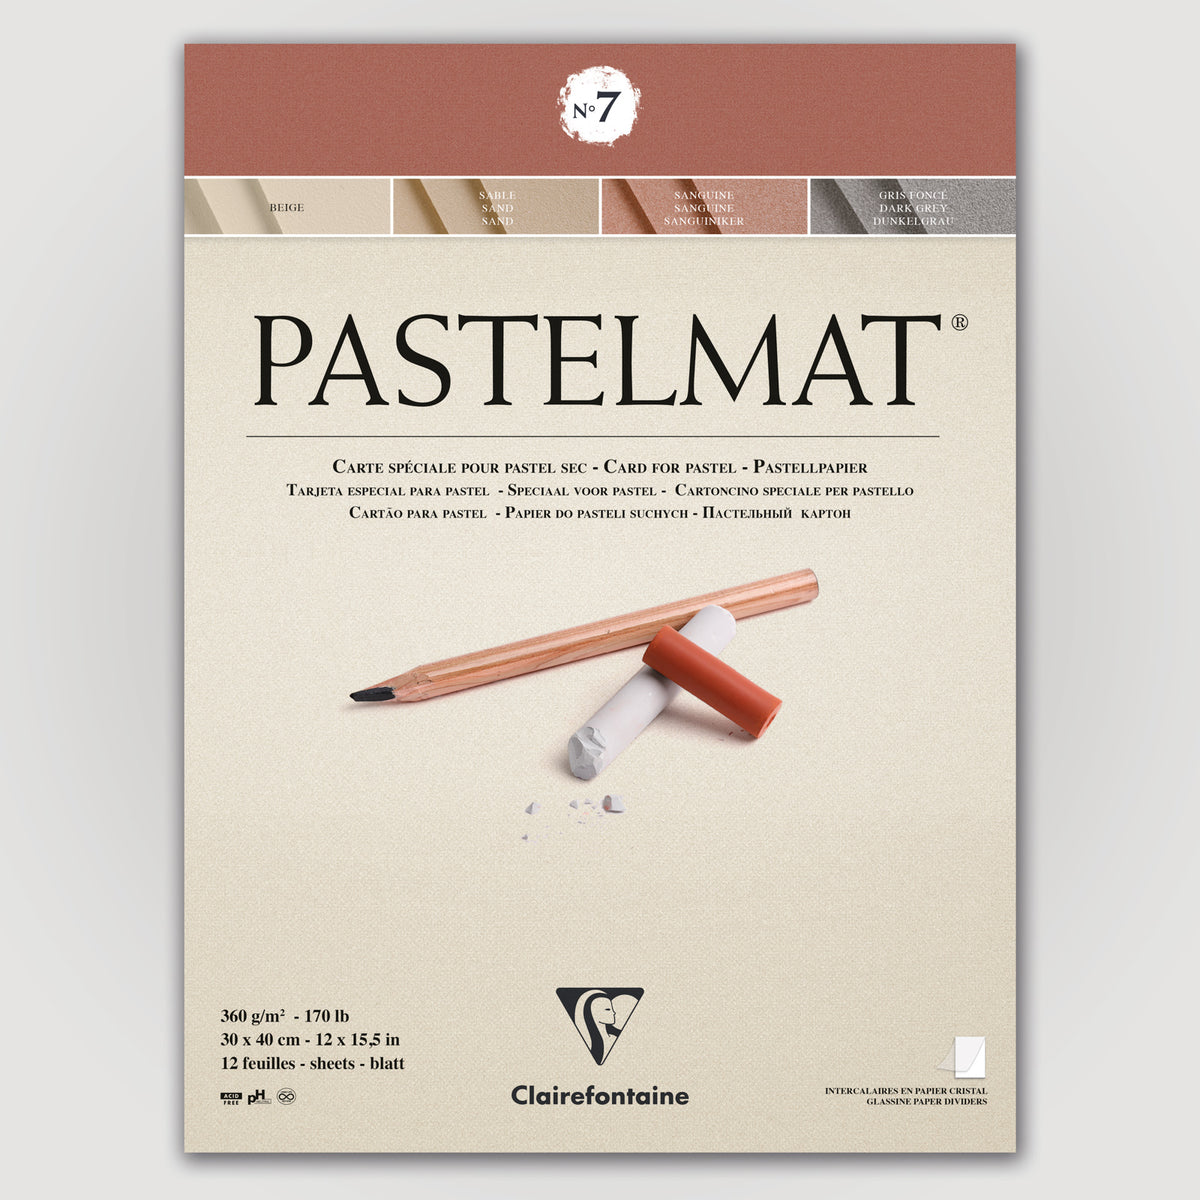 Clairefontaine Pastelmat N°7 360g 30x40 12 sheets